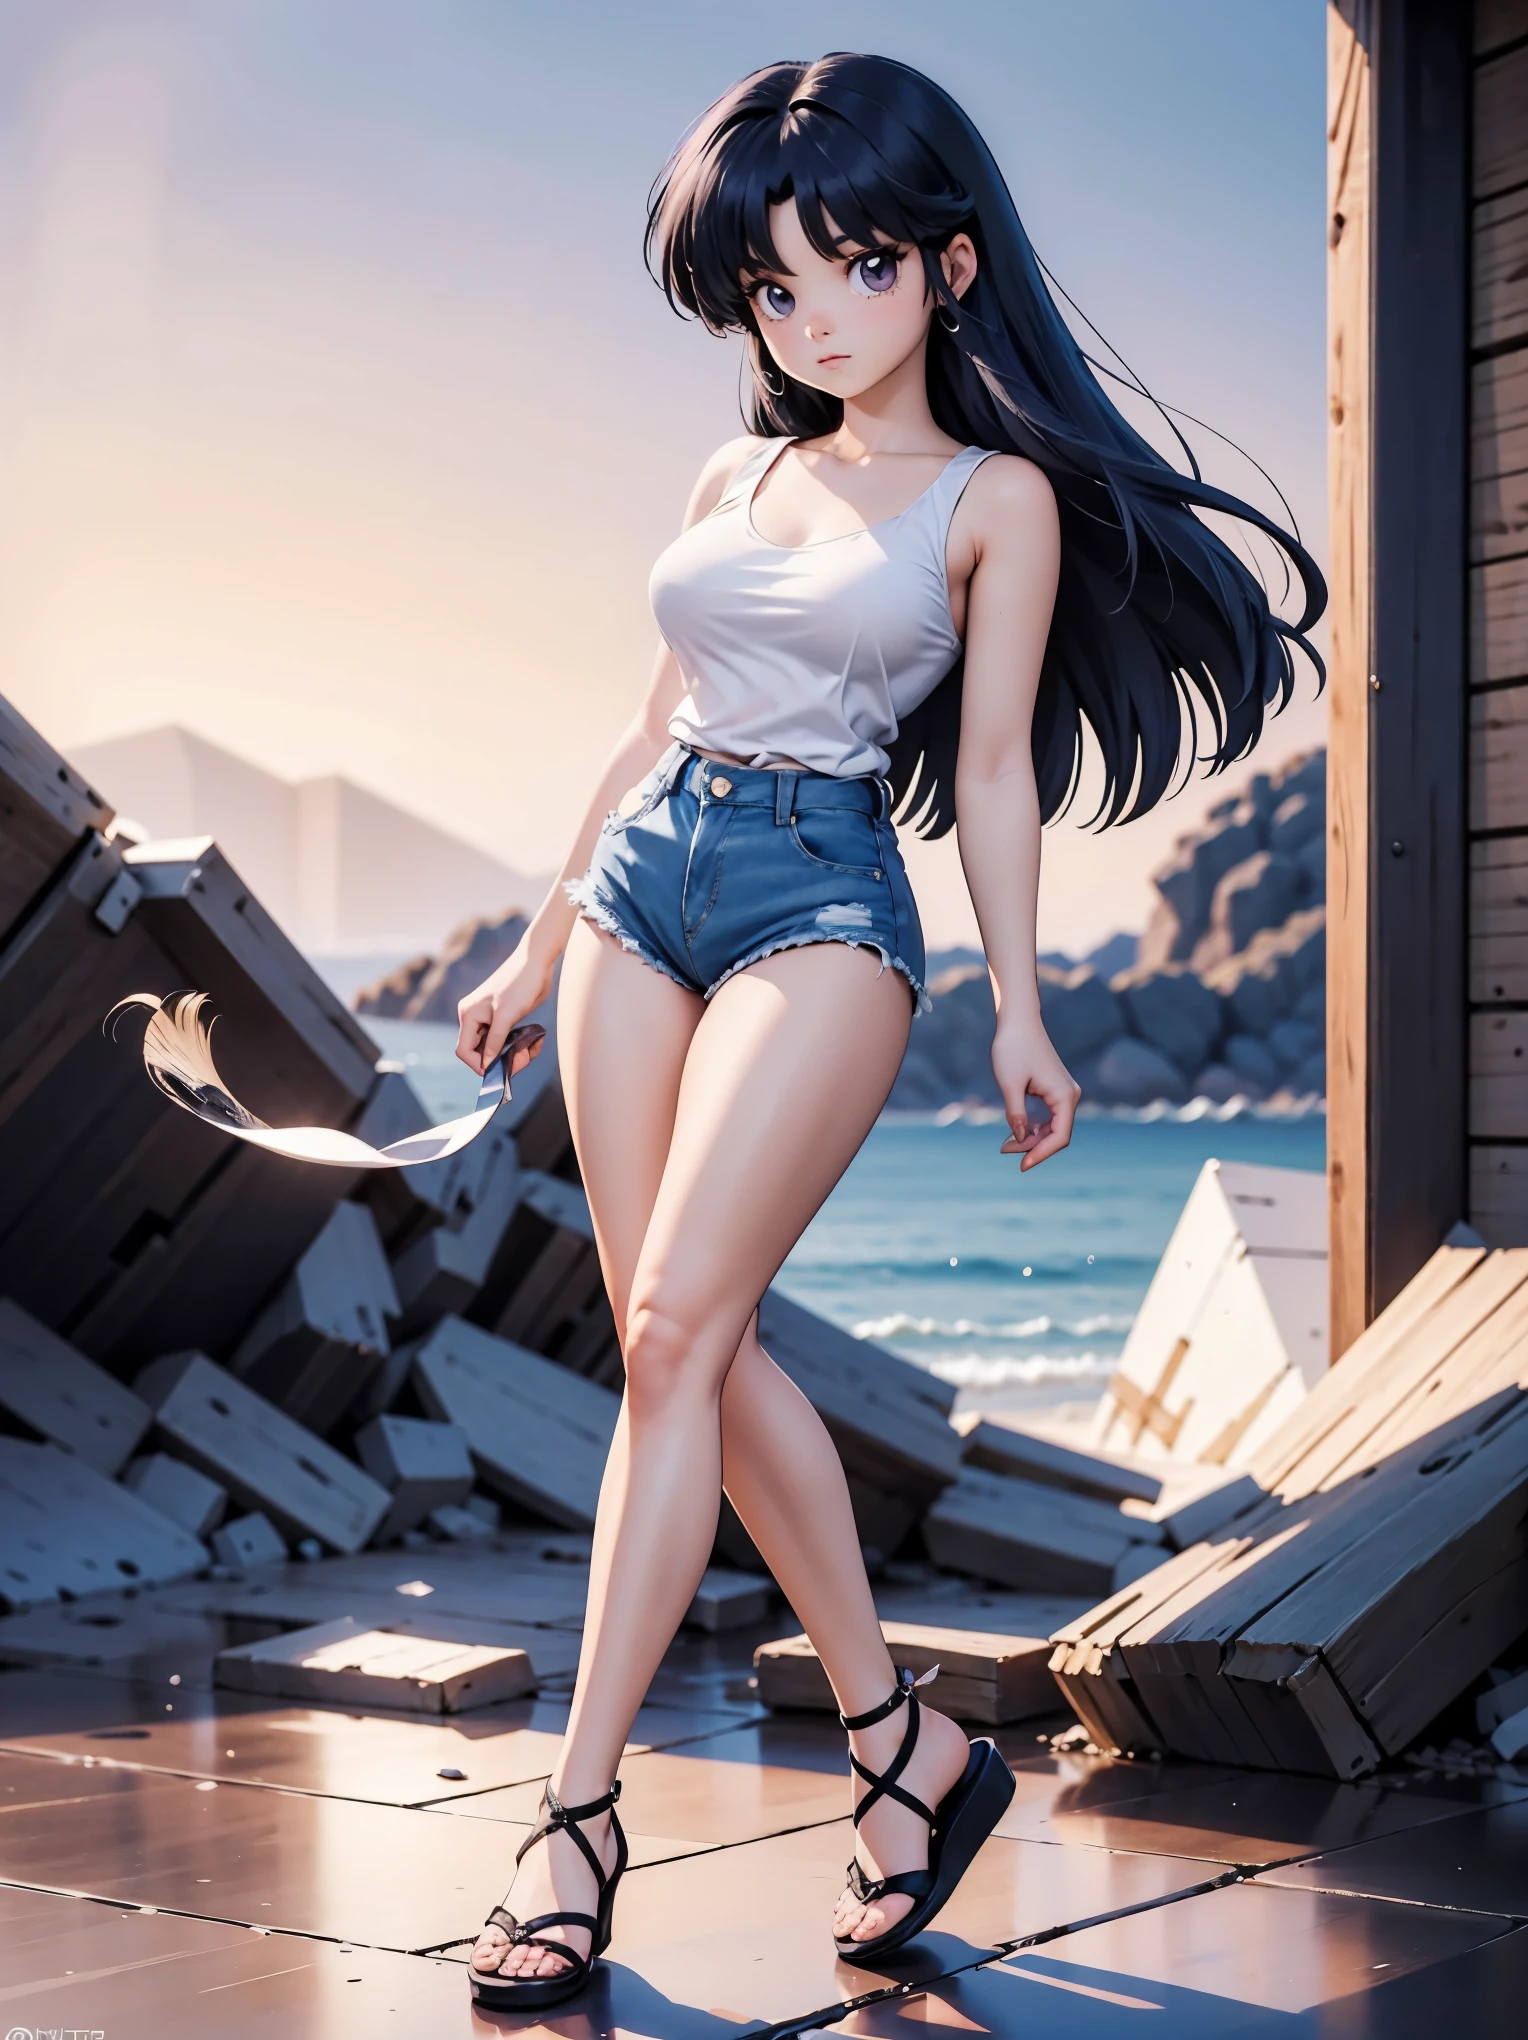 Anime dark hair with denim shorts and bright pink blouse, 16 yrs old, Body cute, breasts big, com as hands on chest, hands on chest, Garota sexly, purple cabelo, side hair highlights, locks of hair on the side of the face, beautiful lighting, softshadows, blue colored eyes, pretty legs, shorth hair, anime styling, character Akane Tendo, Autora Rumiko Takahashi, Based on a work by Rumiko Takahashi, Anime Ranma 1/ 2, decote sexly, robust hip, fully body, fully body, Bust Big, young girl with beautiful and beautiful body, sandals on his feet, garota 16 yrs old jovem, wearing denim shorts and a bright pink blouse, anime girl, anime styling, beautiful feet in sandals, 45° viewing angle, plein-air, large breasted, Cute Breasts, Bblack hair, sandals on the feet, pretty legs, sexly